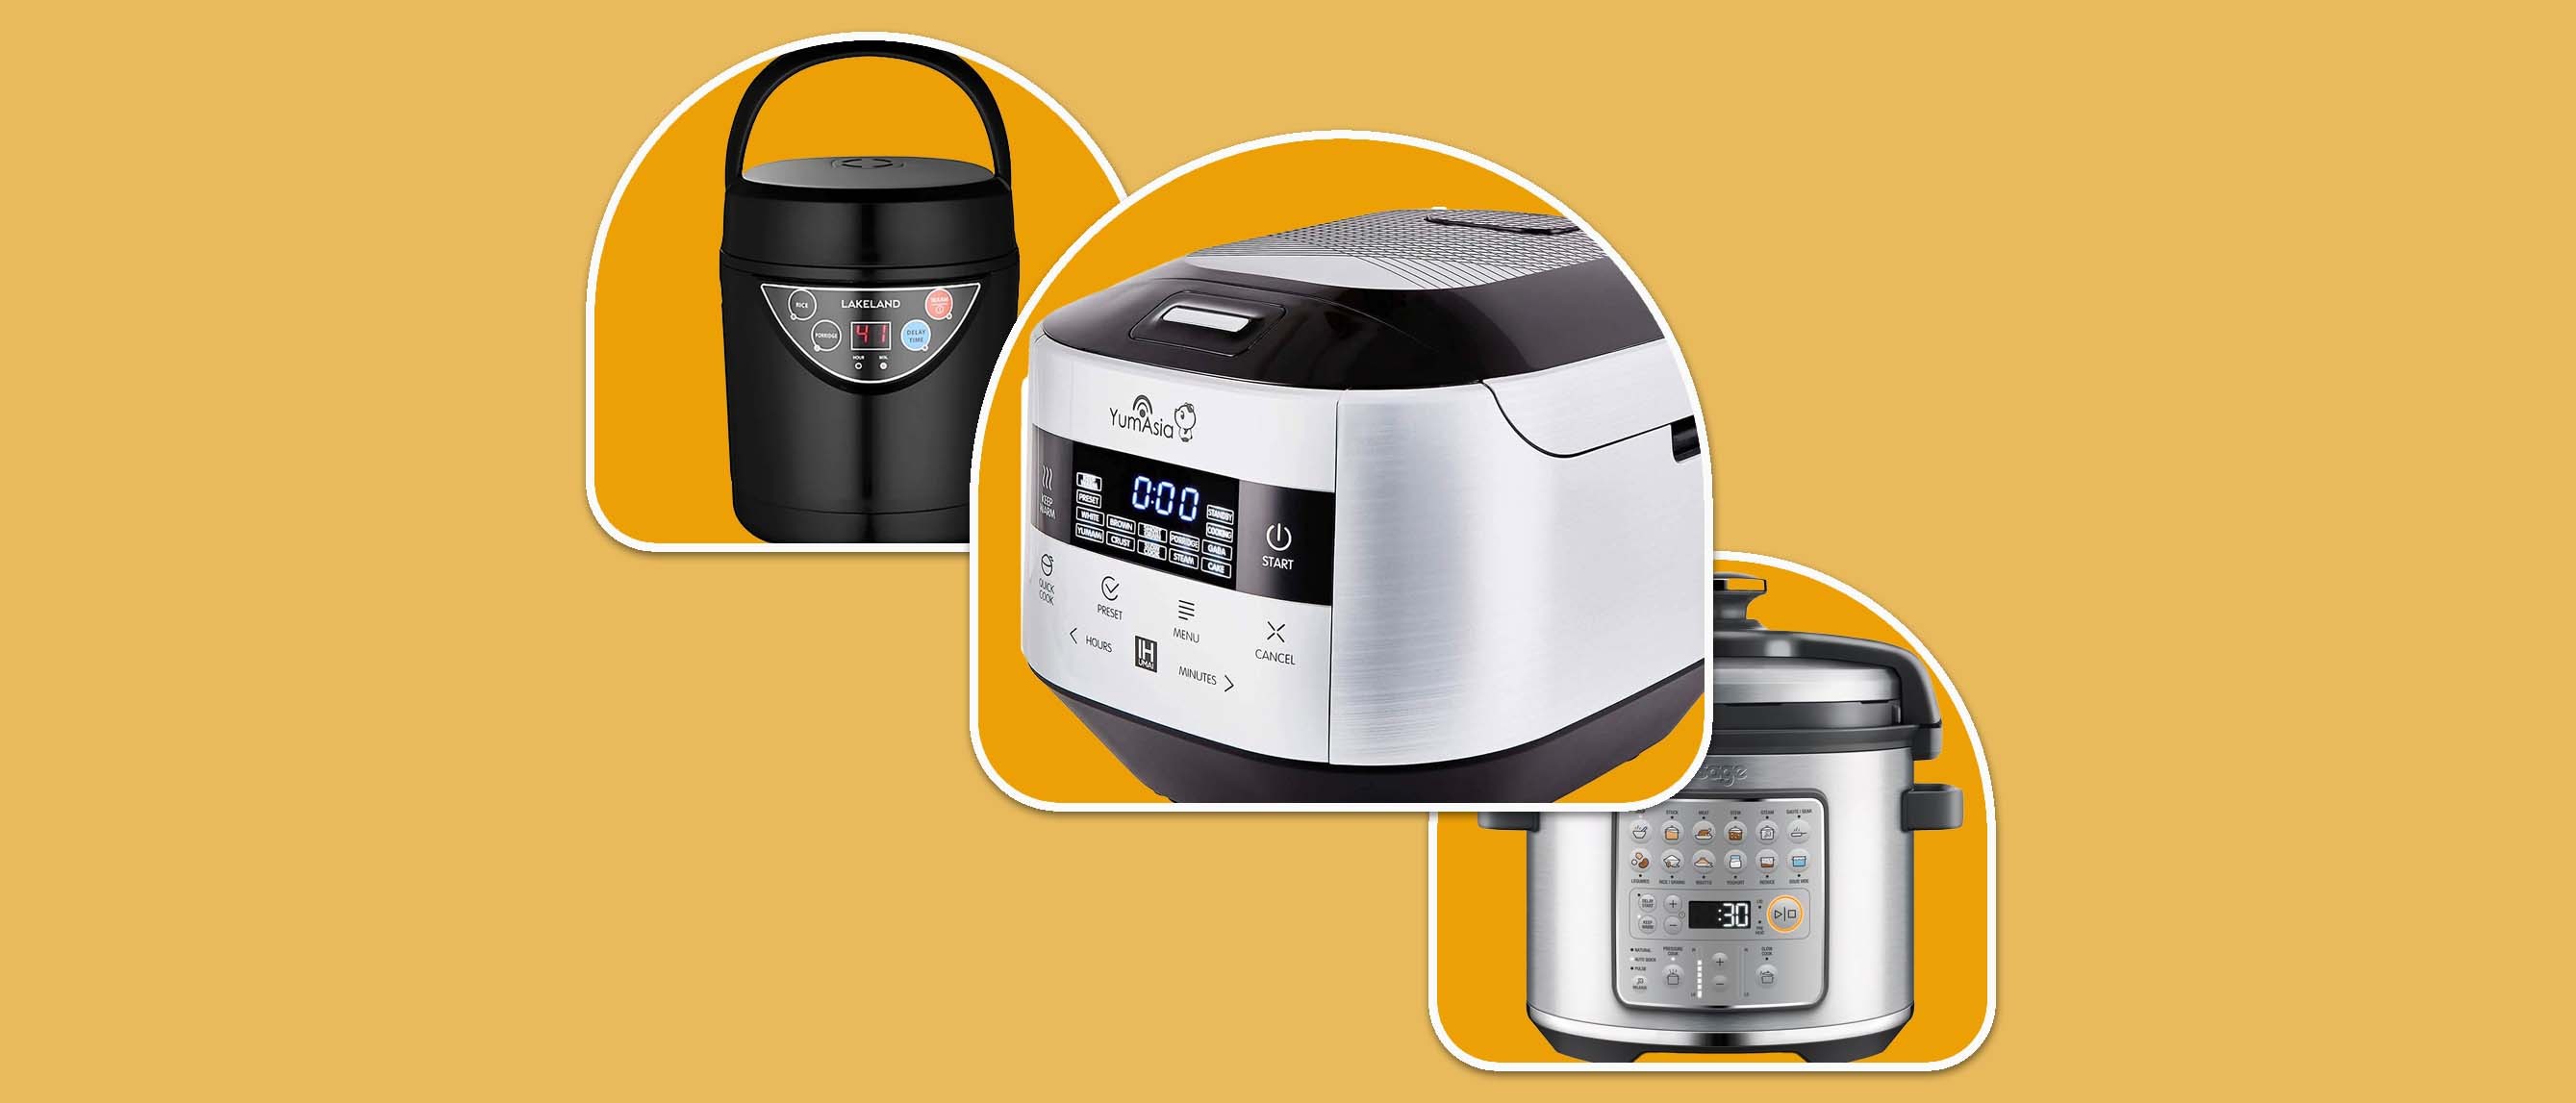 These rice cookers are best for fluffy, delightful grains